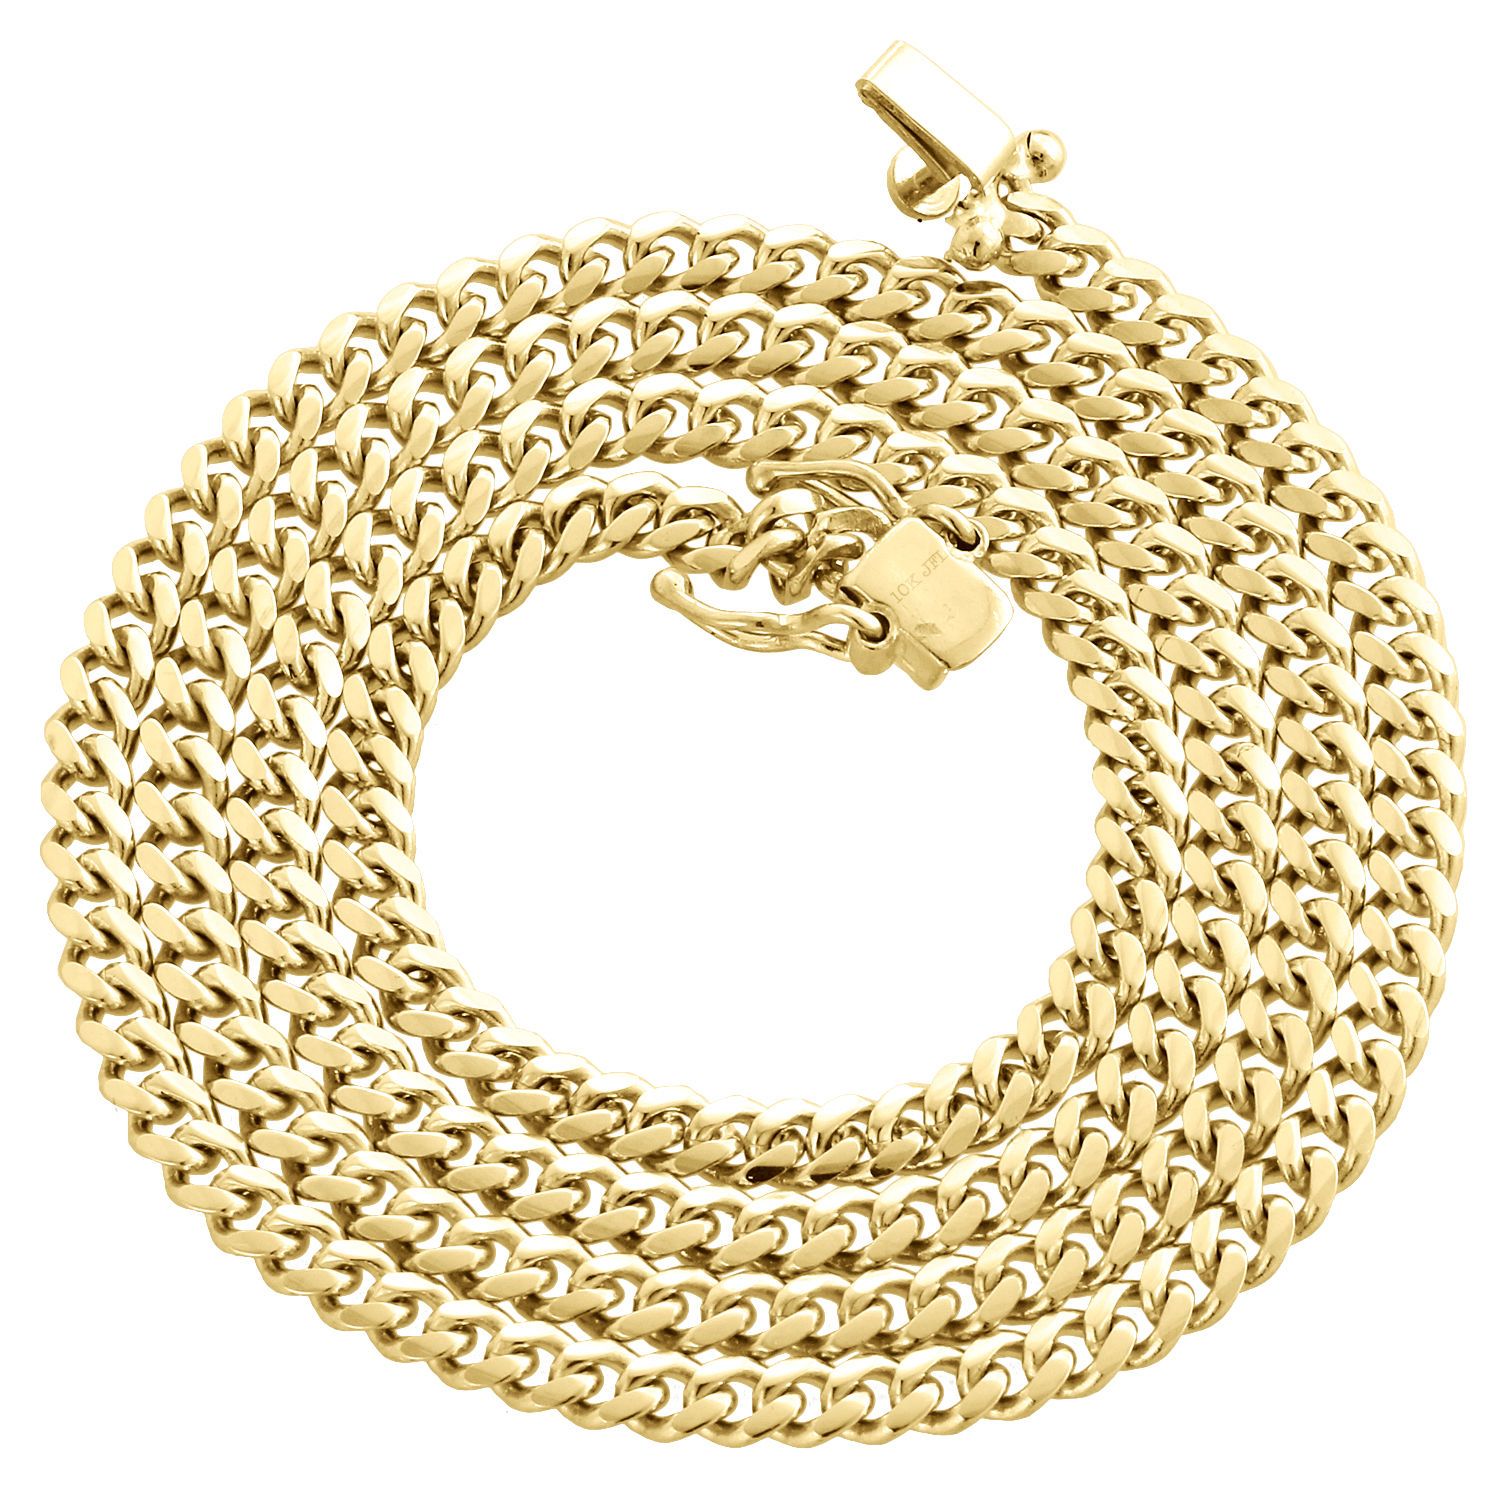 2019 14K Yellow Gold Solid Miami Cuban Link Chain 4mm Box Clasp